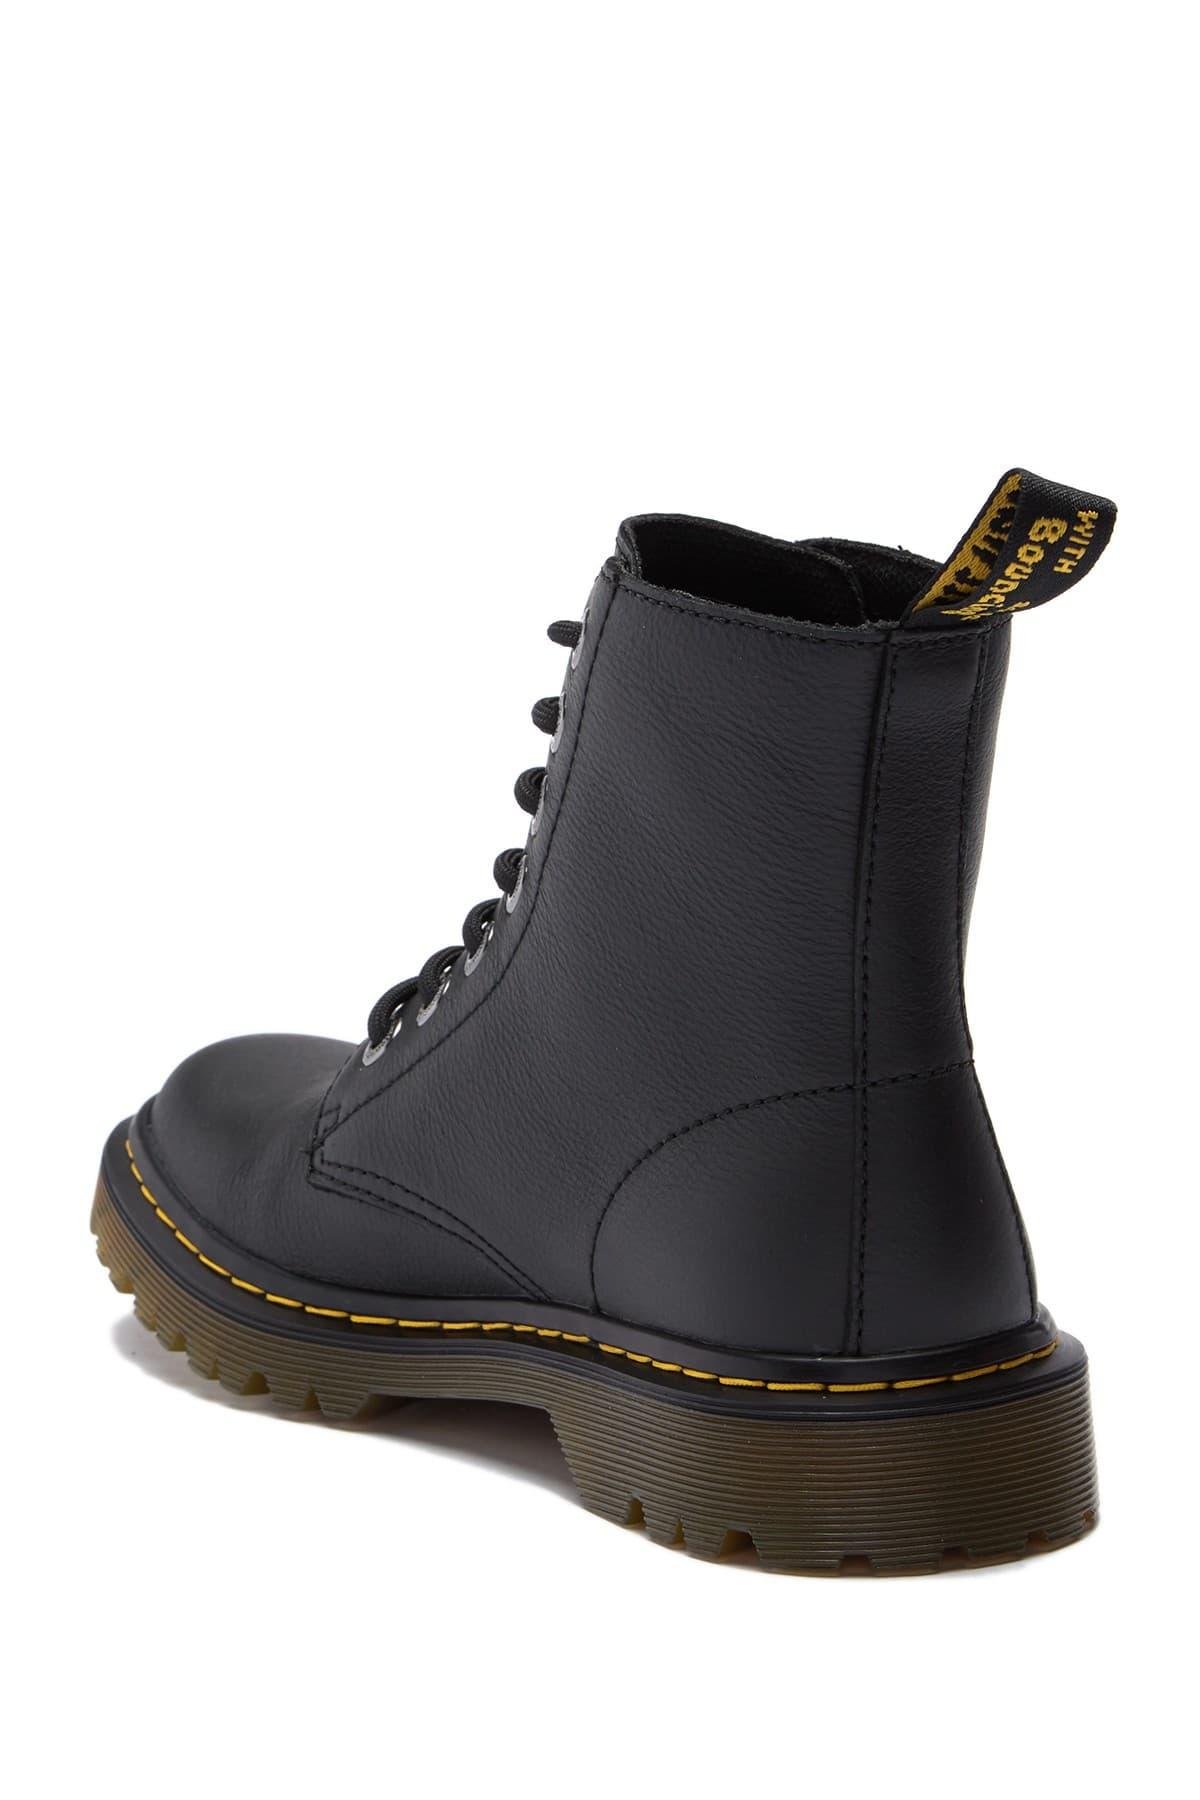 Dr. Martens Luana Leather Combat Boot in Black | Lyst